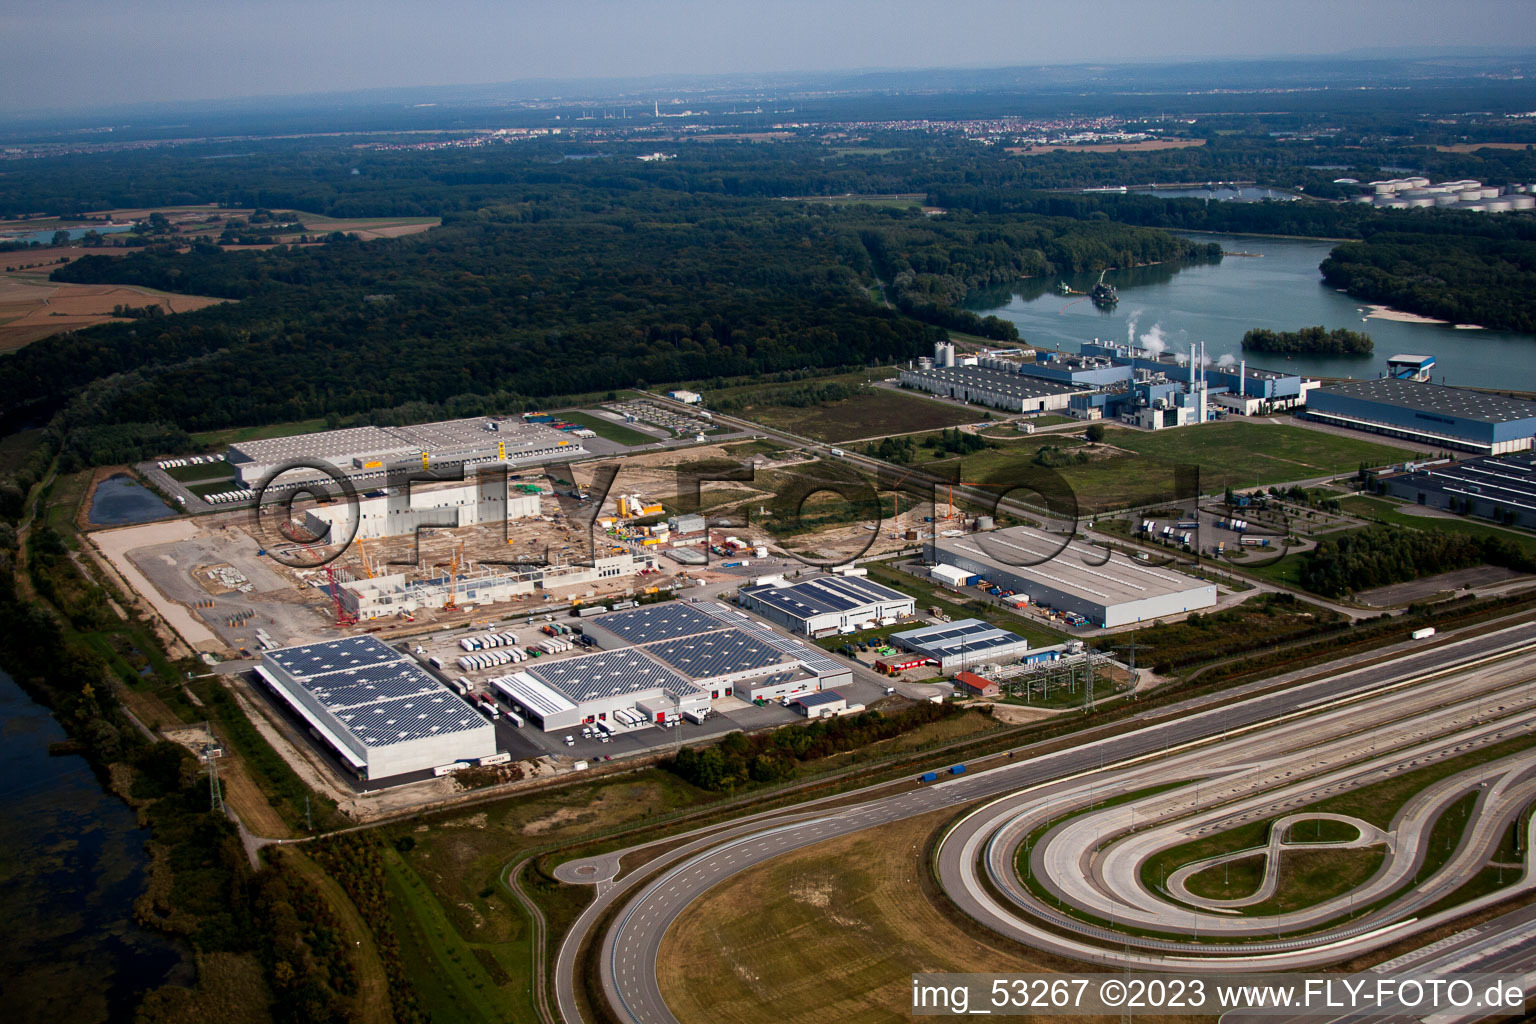 Drone image of Oberwald industrial area in Wörth am Rhein in the state Rhineland-Palatinate, Germany